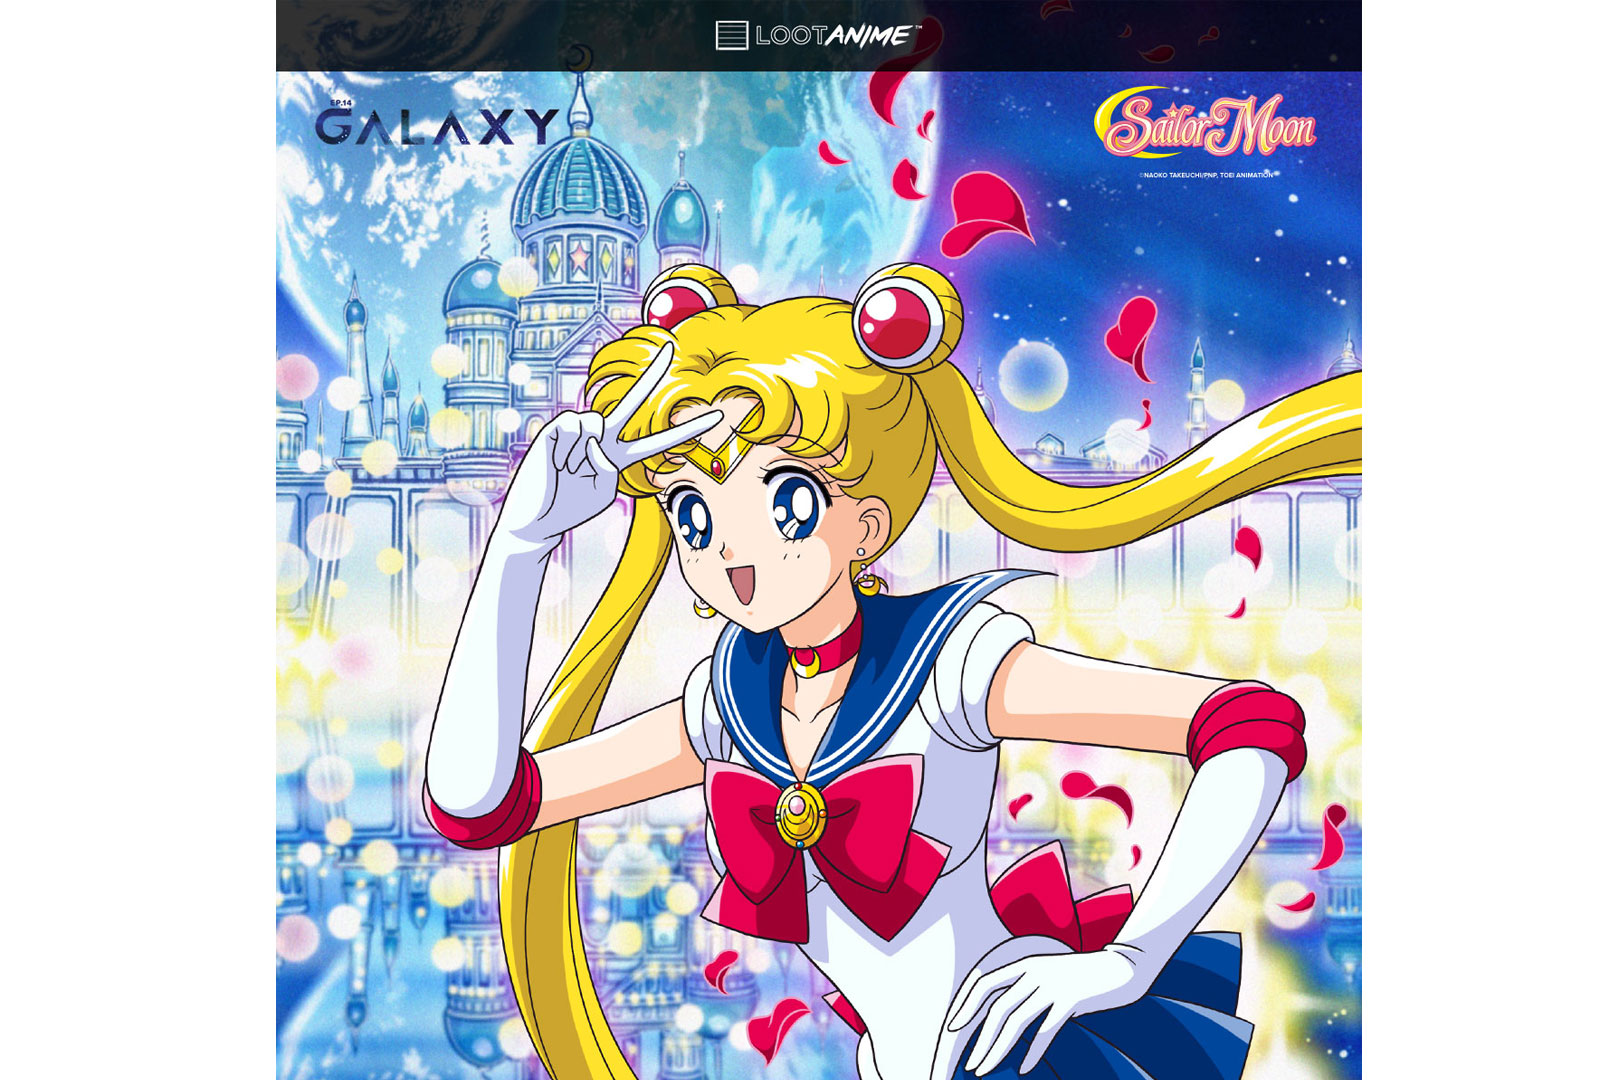 Sailor Moon is now in the December Loot Anime Crate